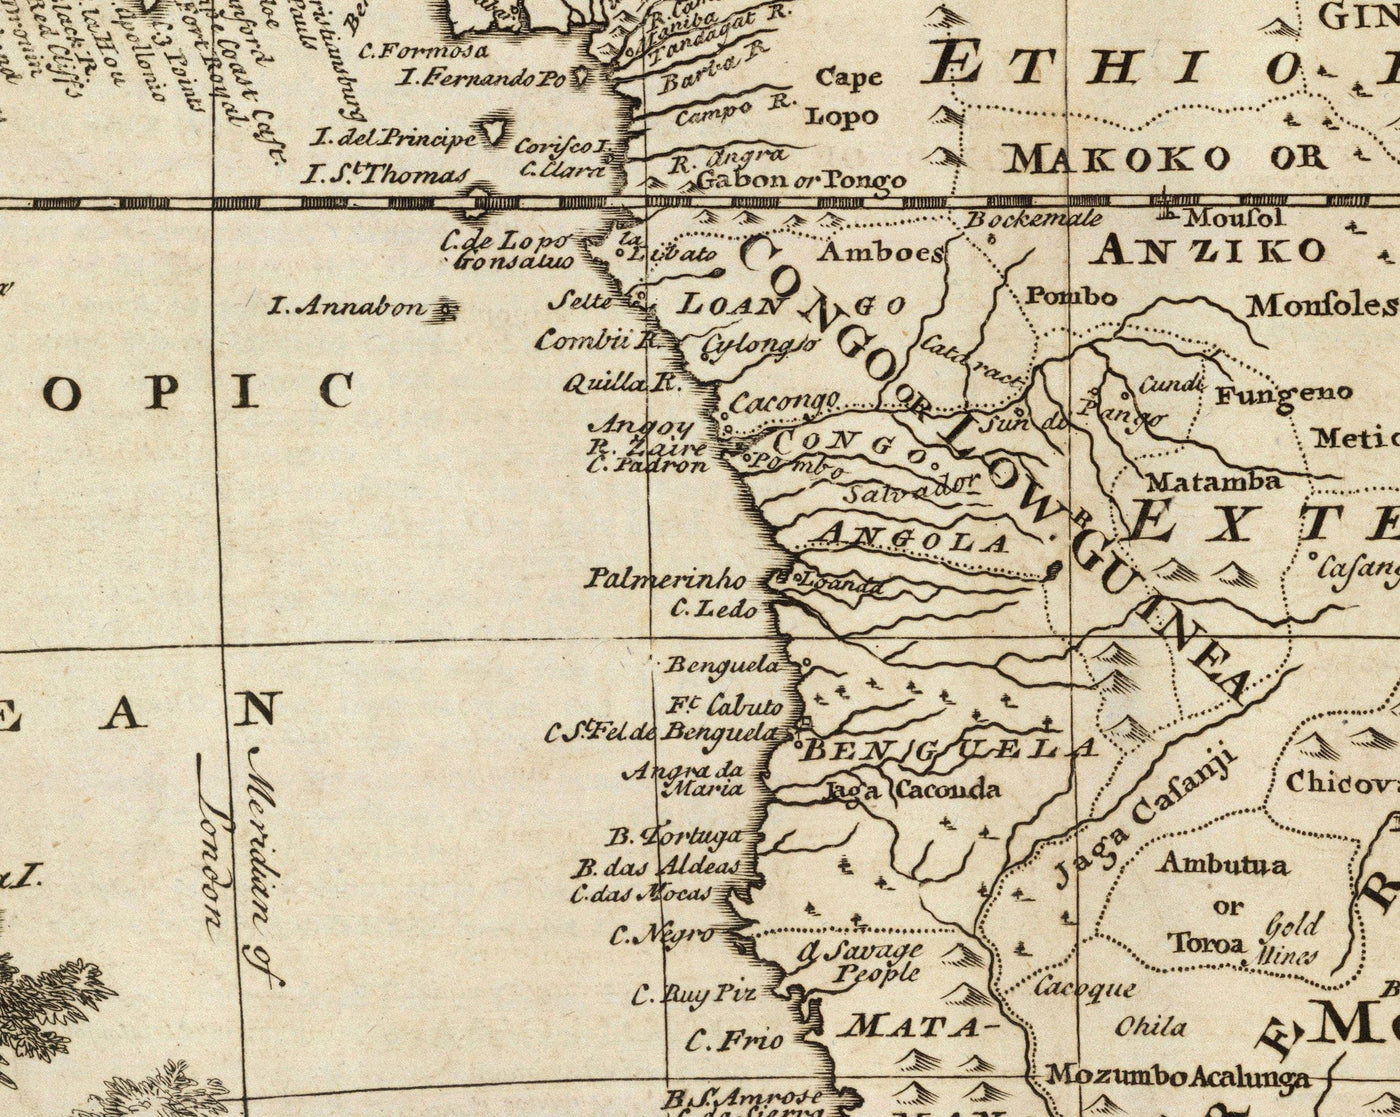 Old Map of Africa, 1747 by Emanuel Bowen - Pre-Colonial - Slave Trade, Negroland, Ethiopia, Barbary, Nubia